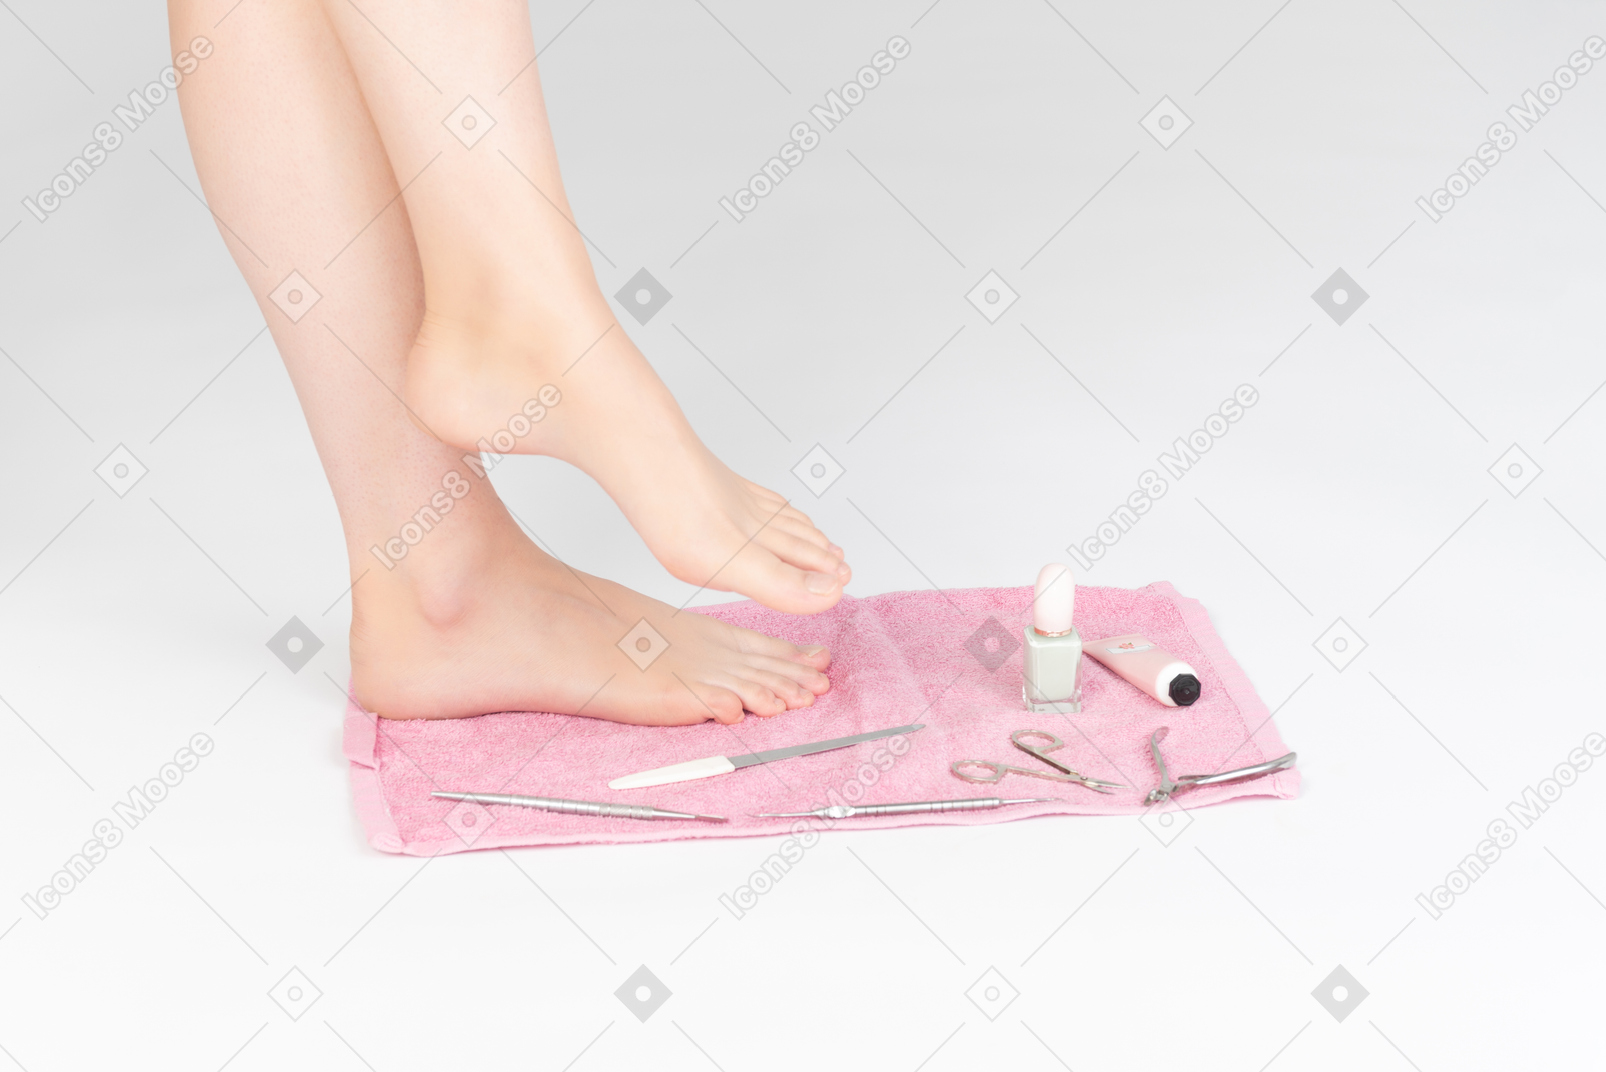 Shot of female legs and manicure tools near it